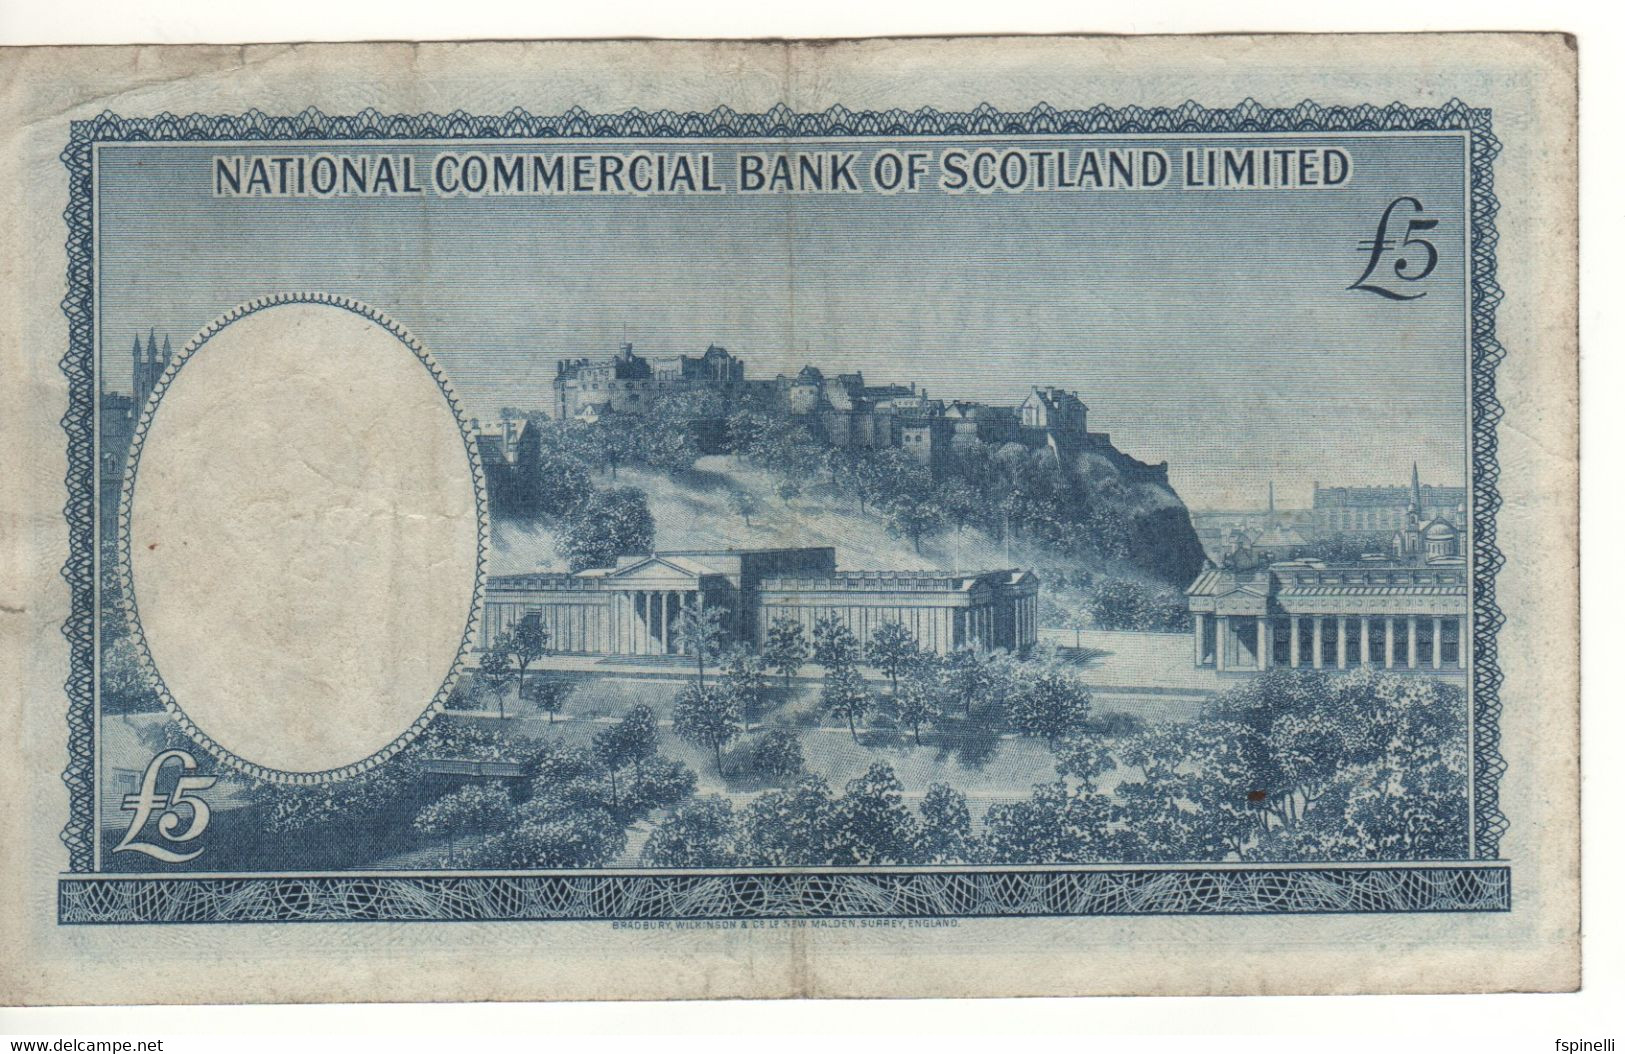 SCOTLAND  5 Pounds  National Commercial Bank Of Scotland Ltd.    P272a  Dated 1st August, 1966, - 5 Pounds